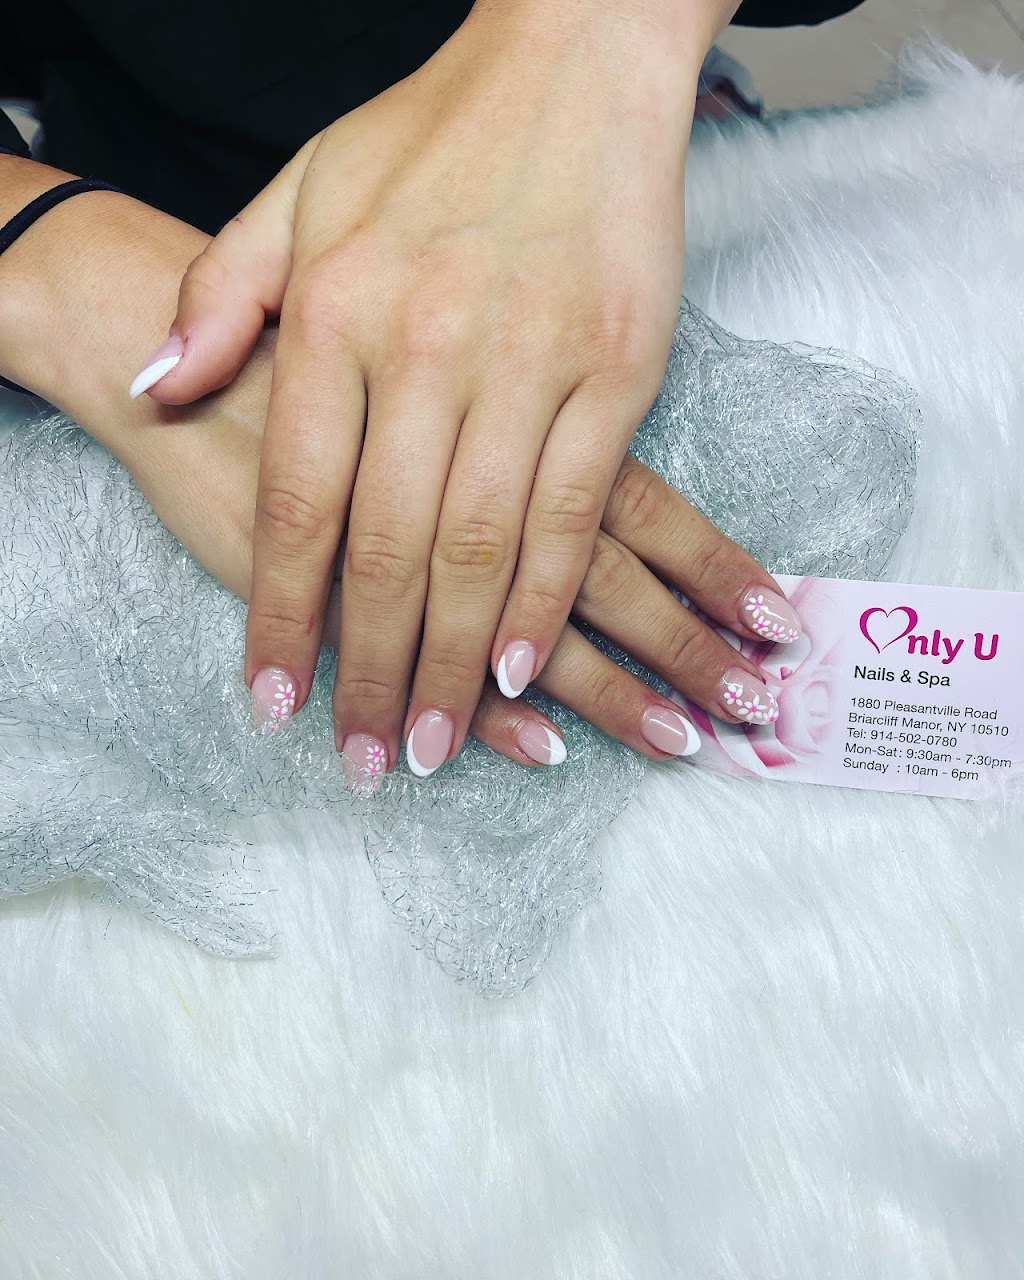 Only U Nail & Spa | 1880 Pleasantville Rd, Briarcliff Manor, NY 10510 | Phone: (914) 502-0780